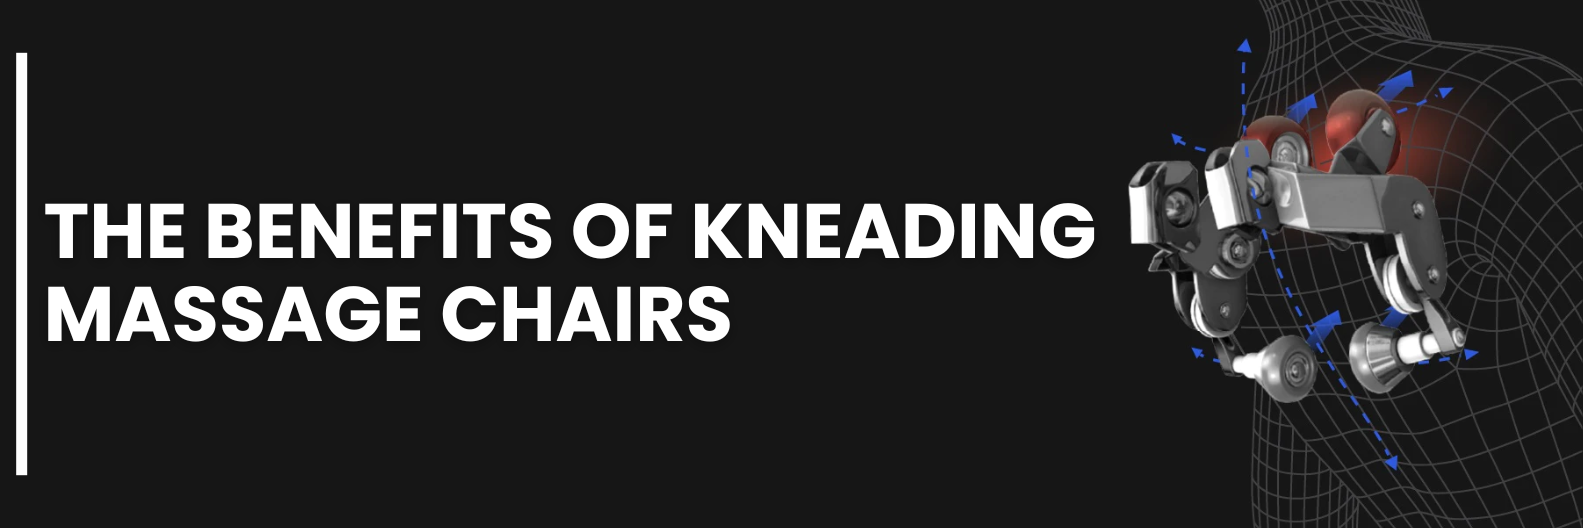 Kneading massage chairs provide numerous health benefits from relieving muscle tension and stress to improving circulation.  